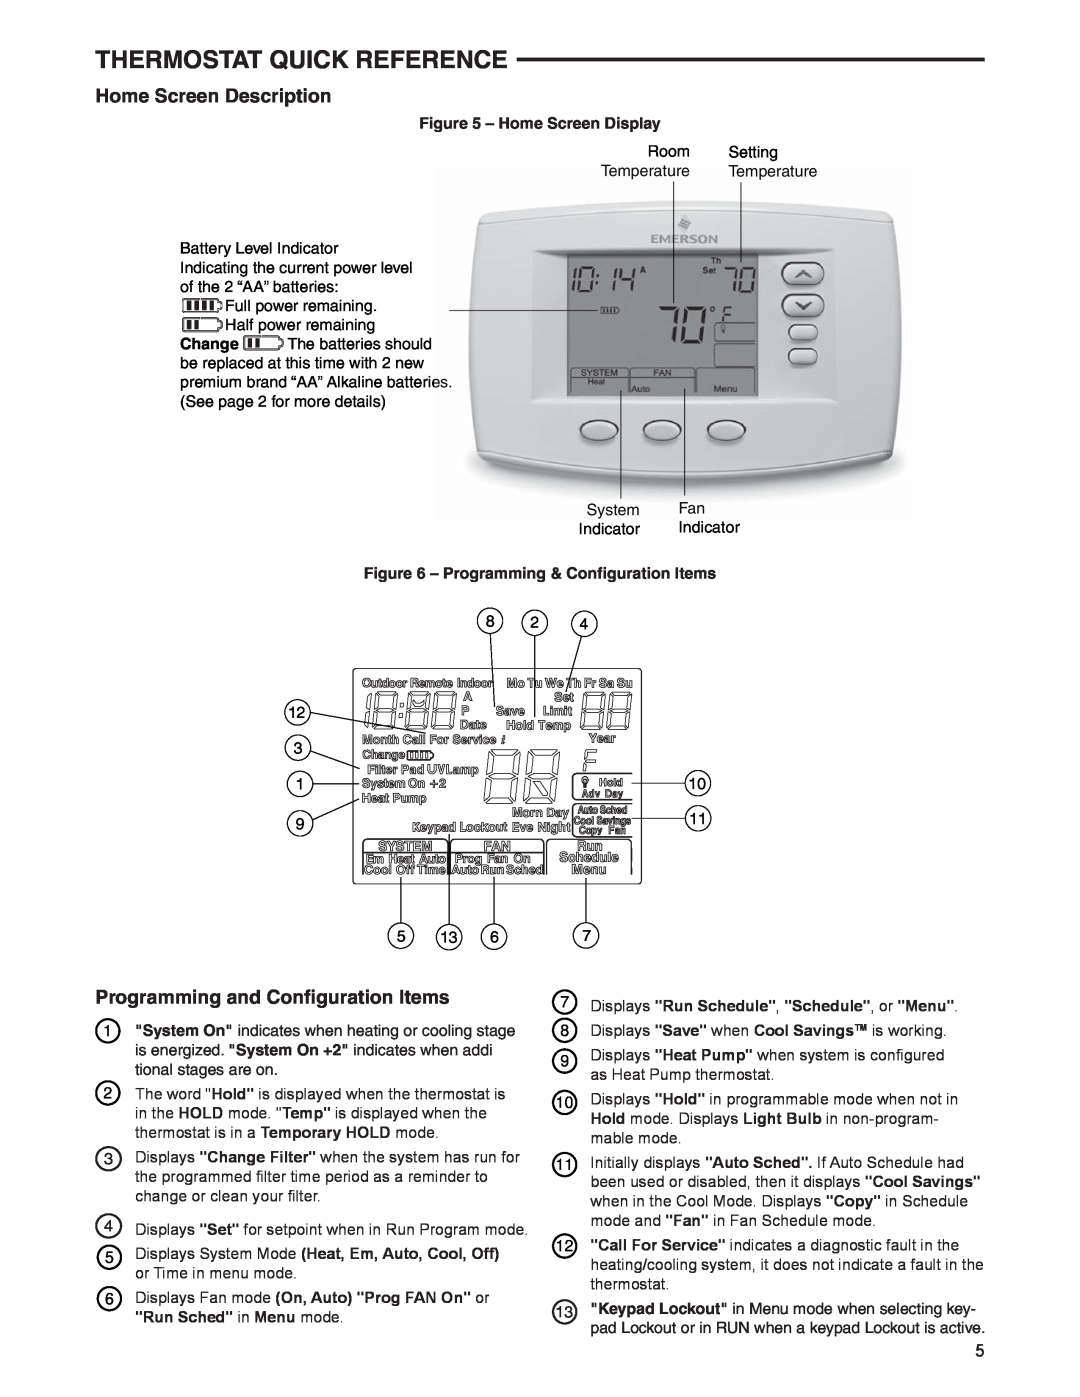 White Rodgers 1F95-0671 Thermostat Quick Reference, Home Screen Description, Programming and Conﬁguration Items 